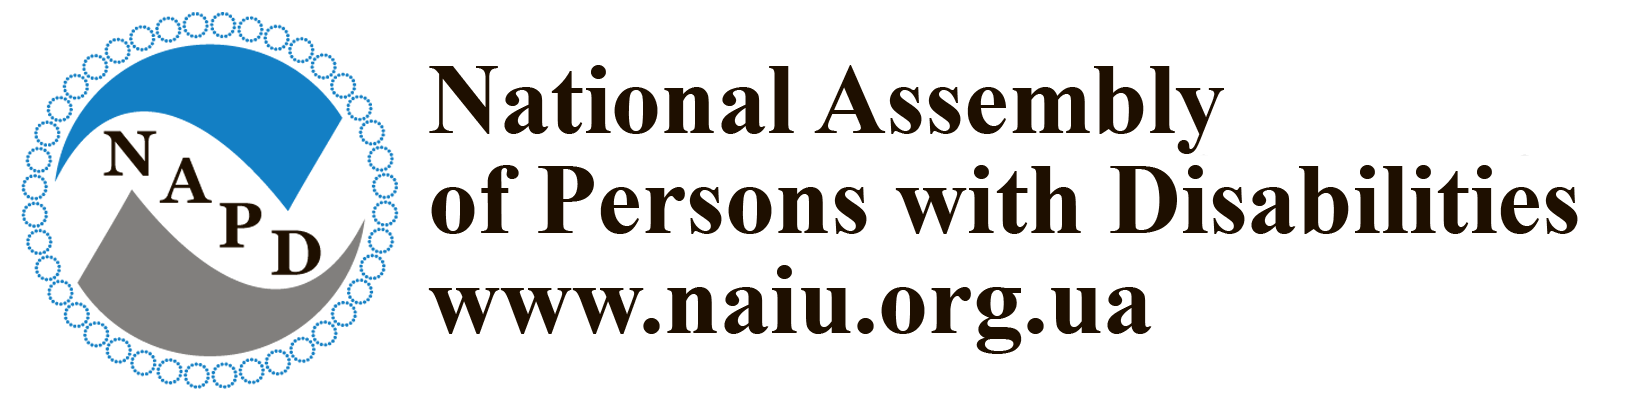 national assembly of person with disabilities www.naiu.org.ua